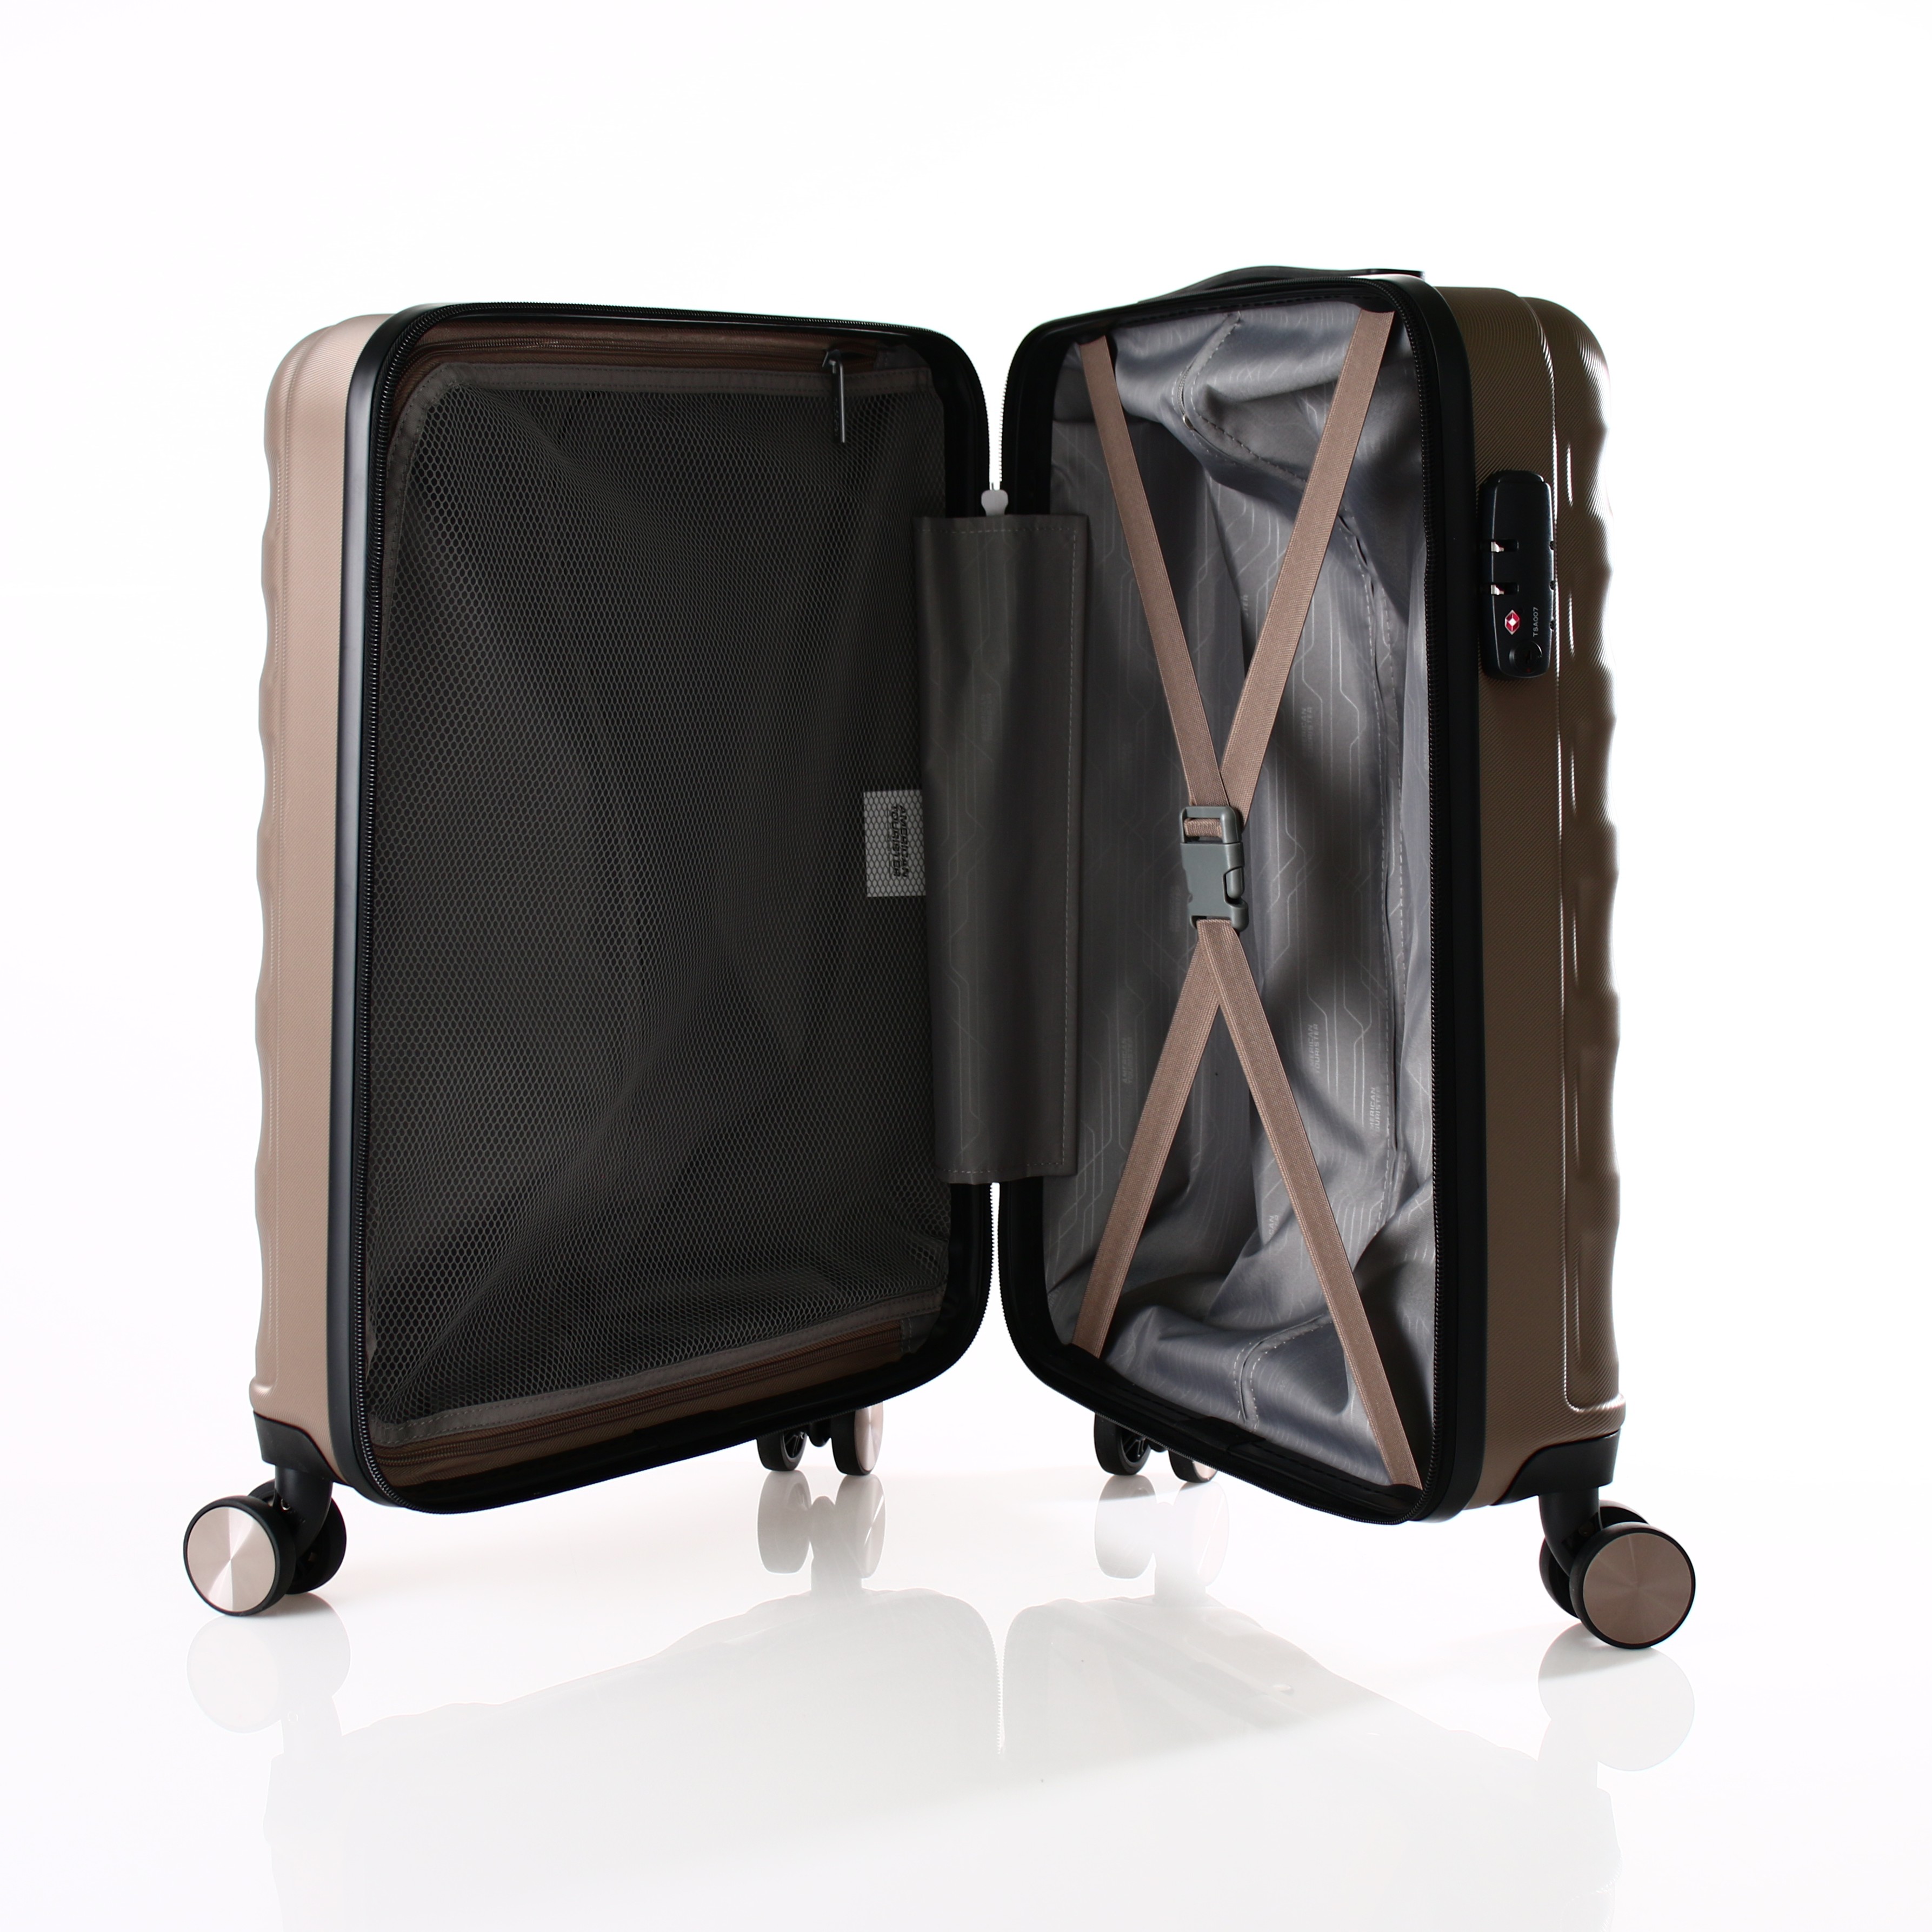 American Tourister Trolley Speed Link 55cm pearl cream